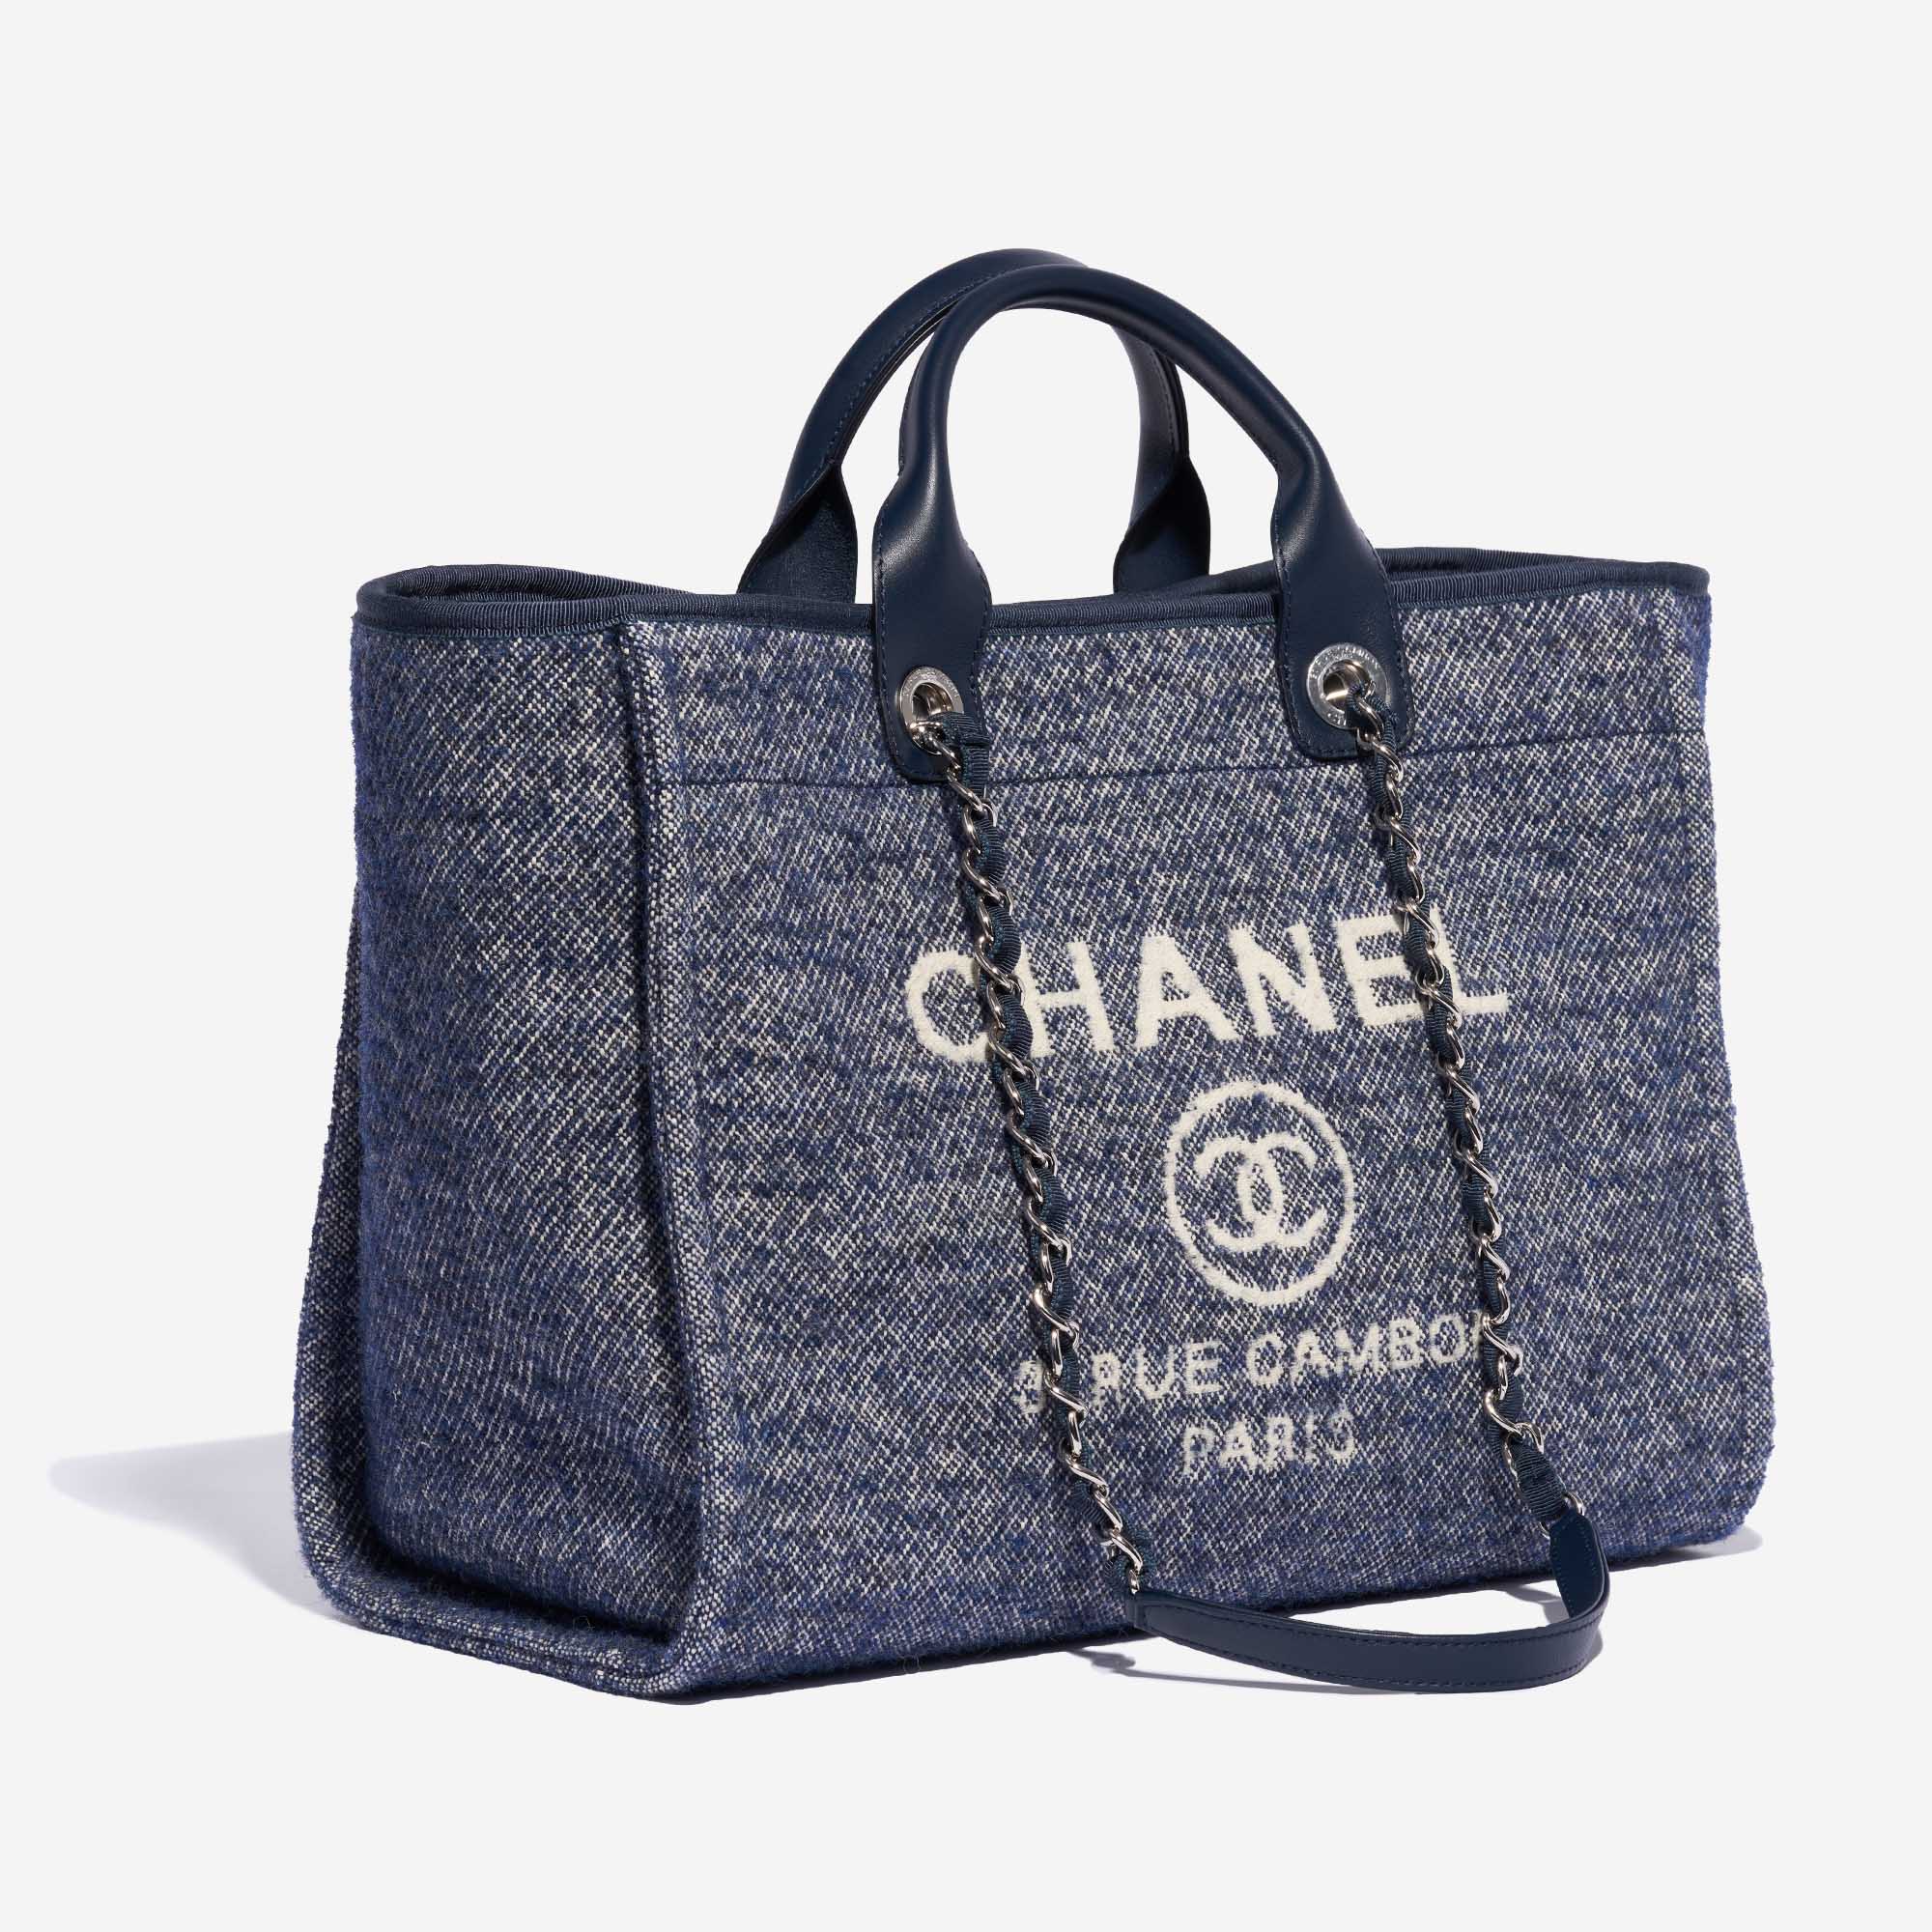 FWRD Renew Chanel Deauville Tweed Chain Tote Bag in Blue